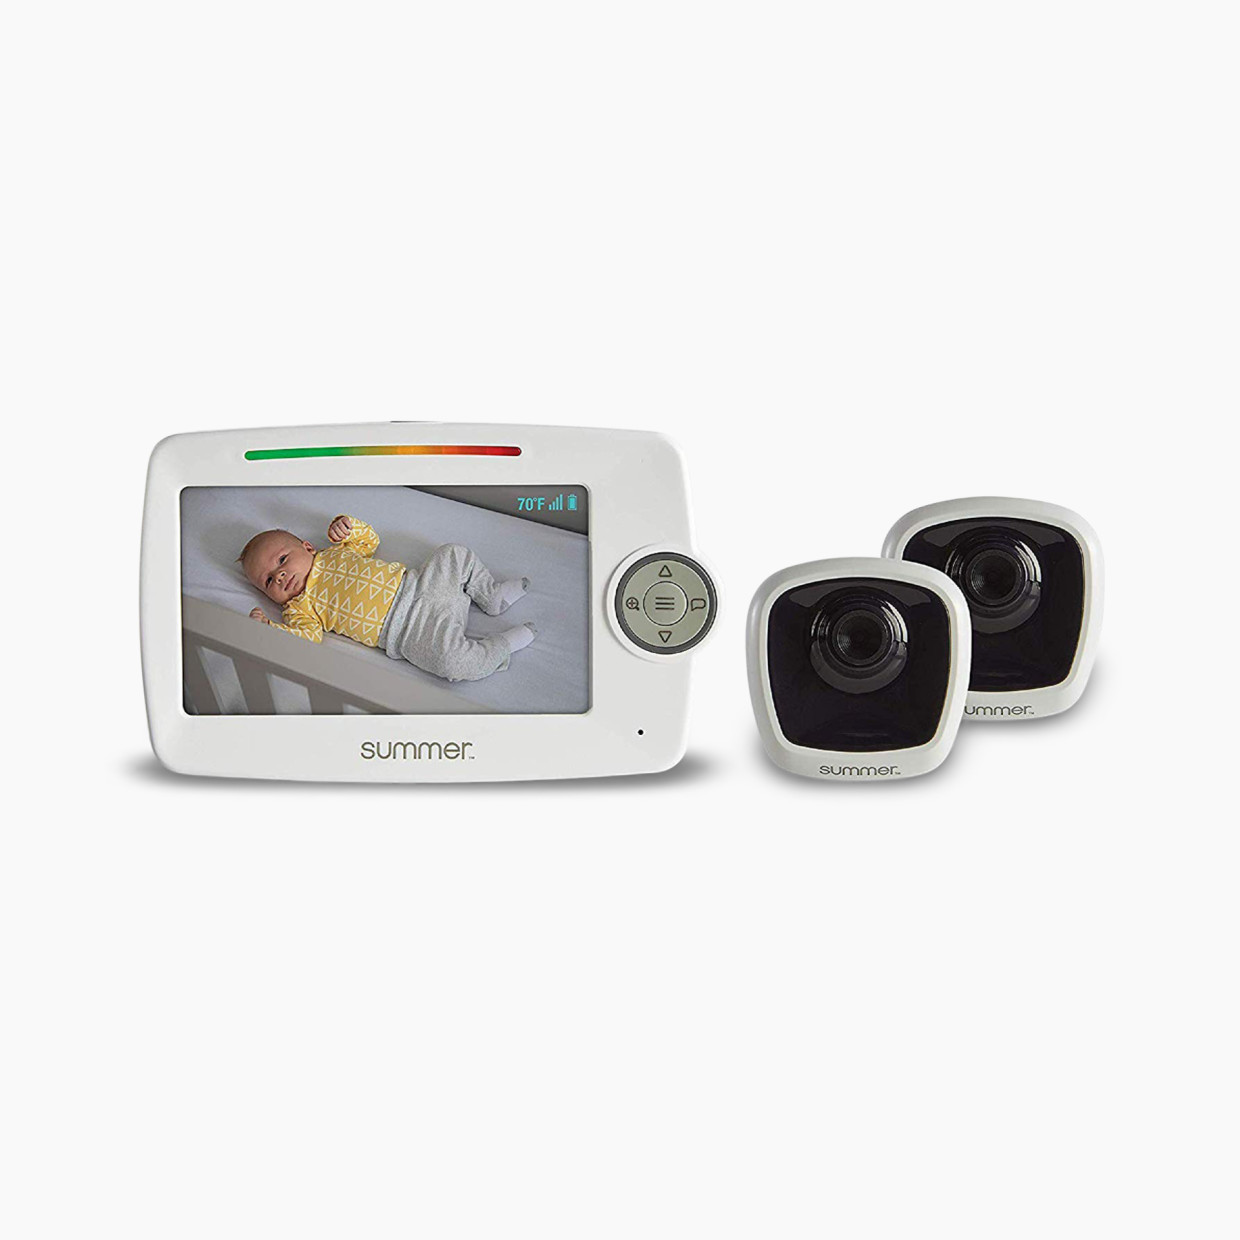 Summer Lookout 5.0" Color Video Monitor - 2 Cameras.